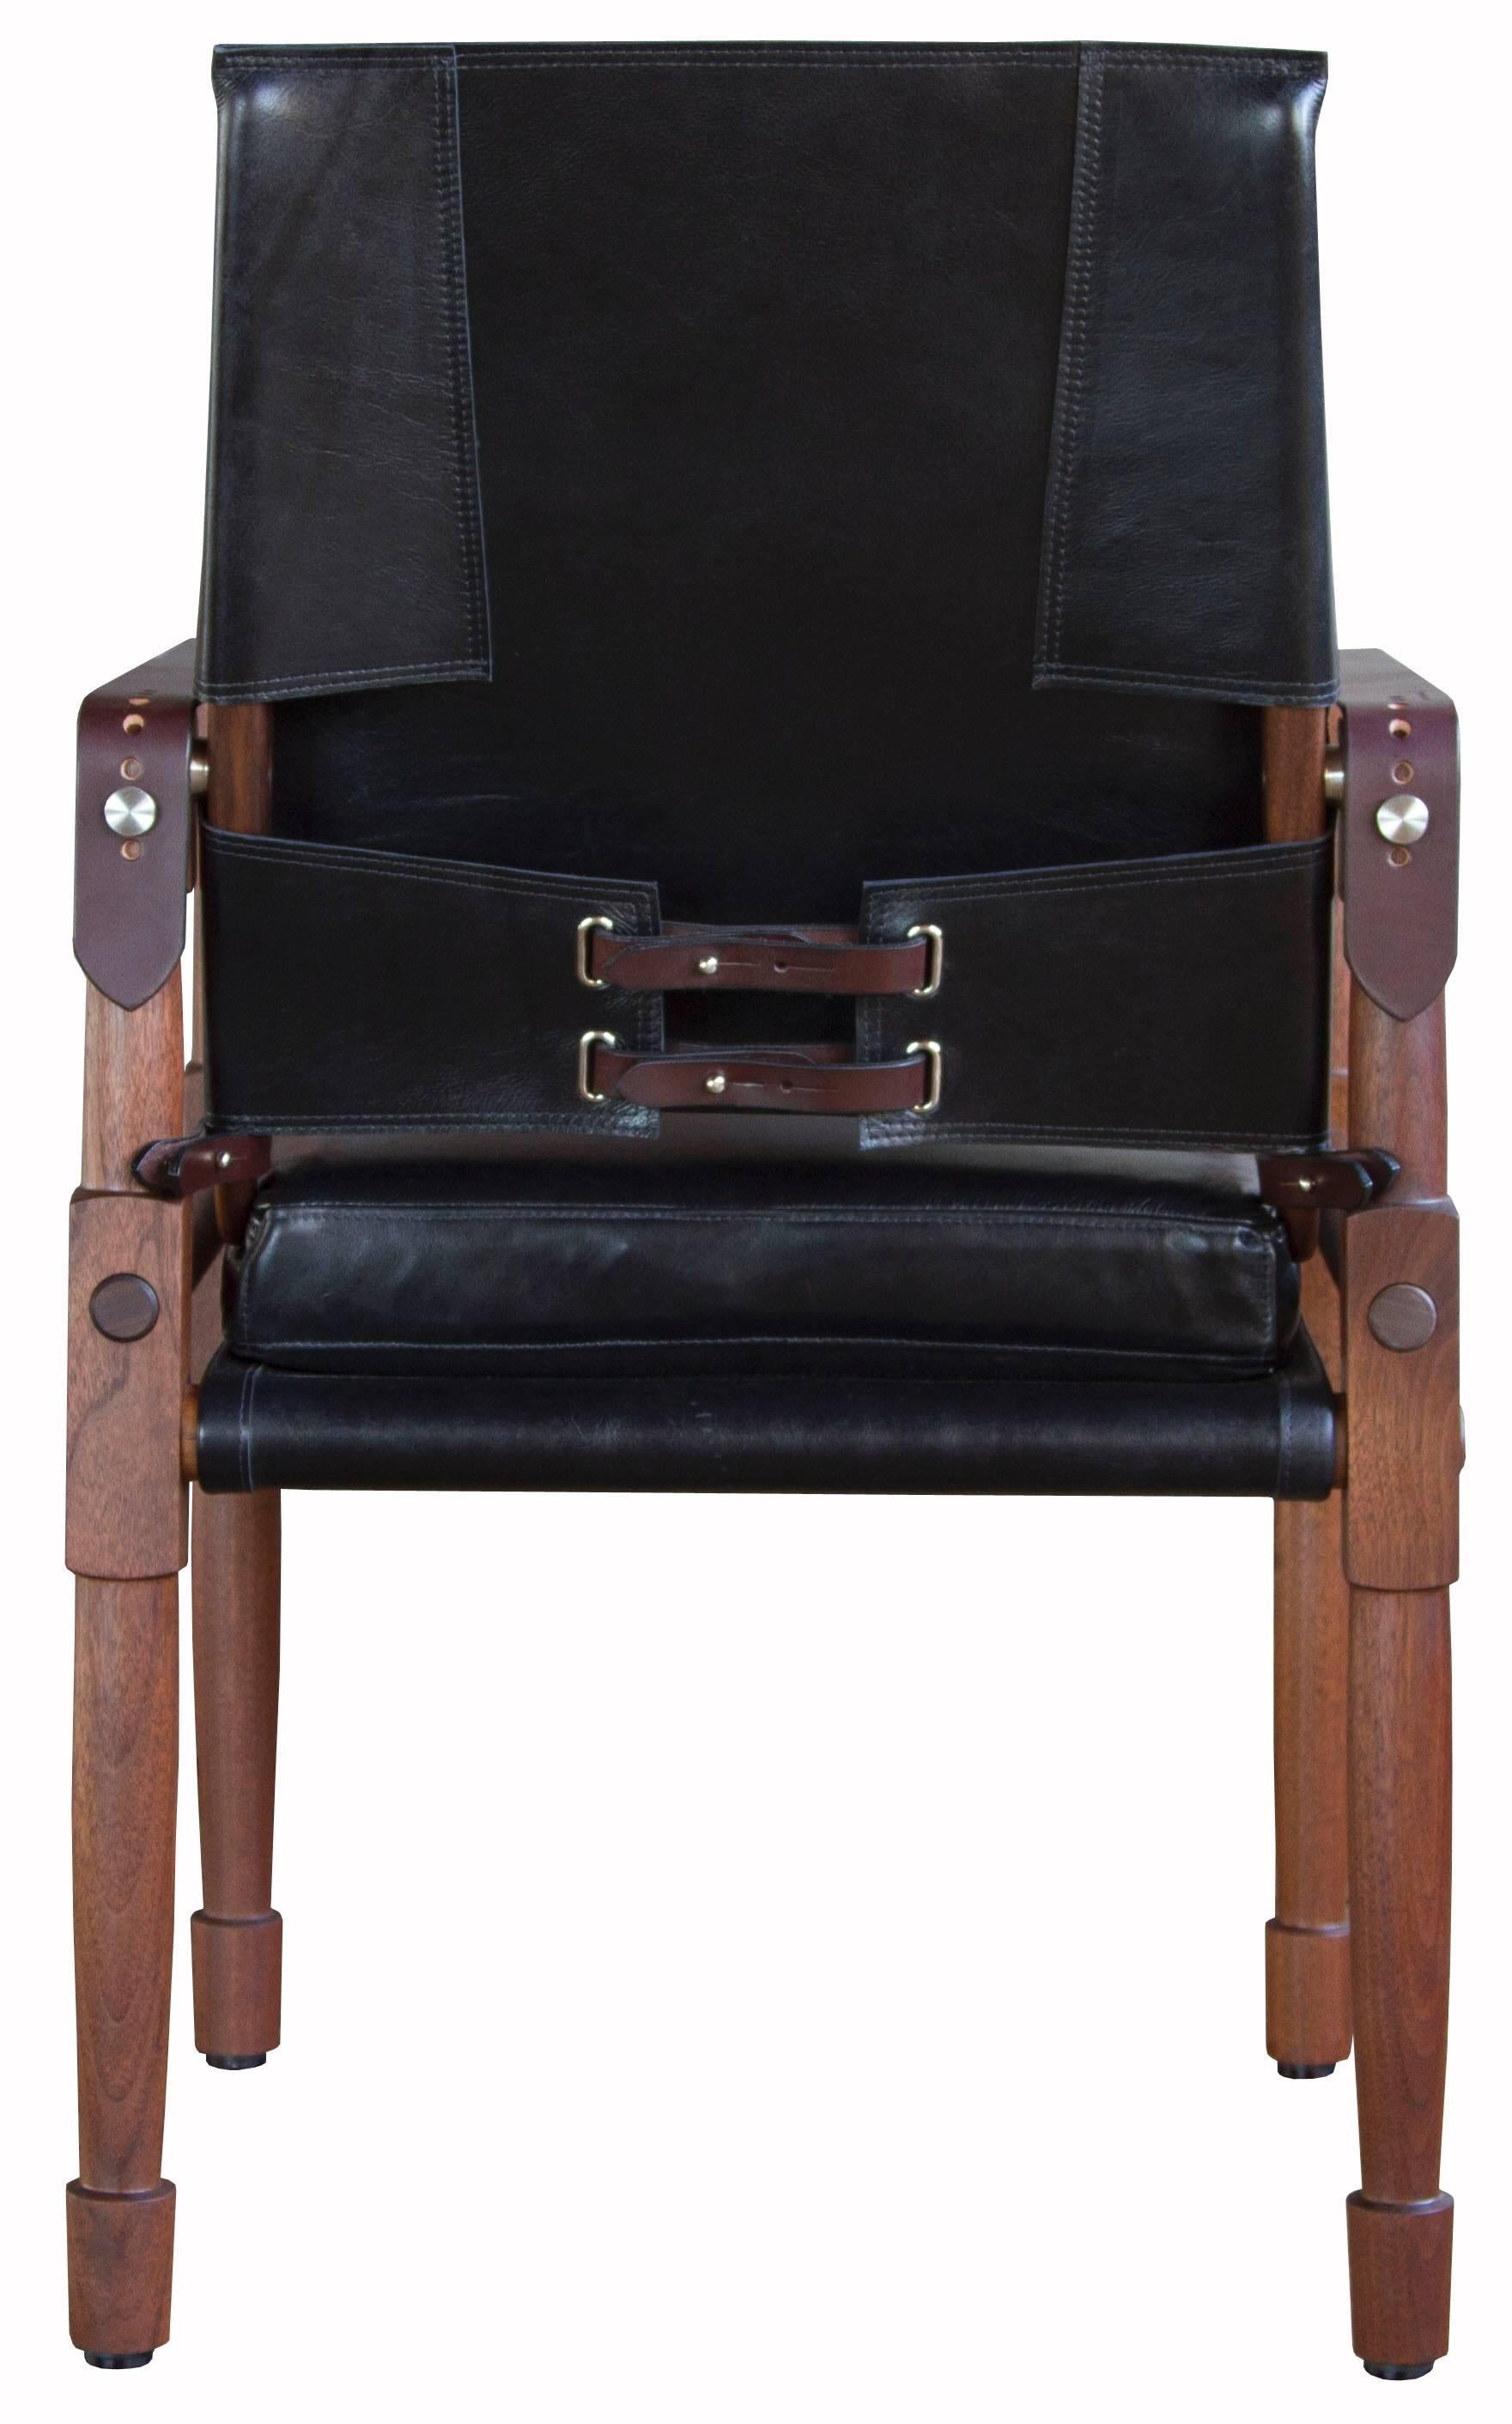 American Chatwin Dining Chair - handcrafted by Richard Wrightman Design